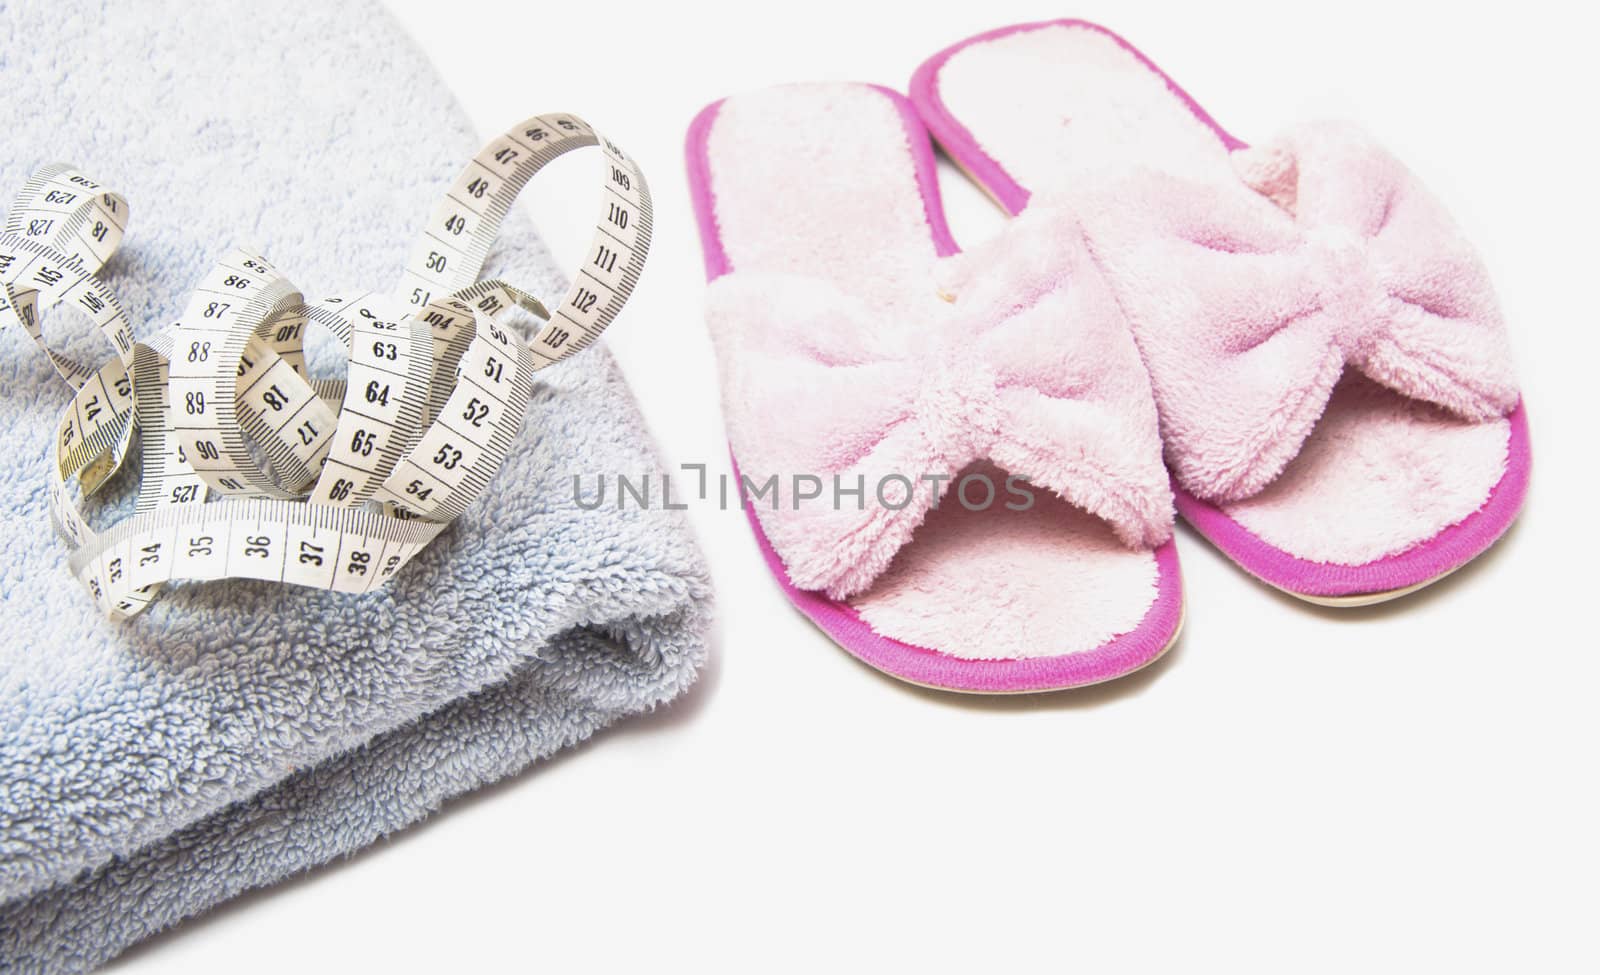 slippers, grey folded towel and metr on white